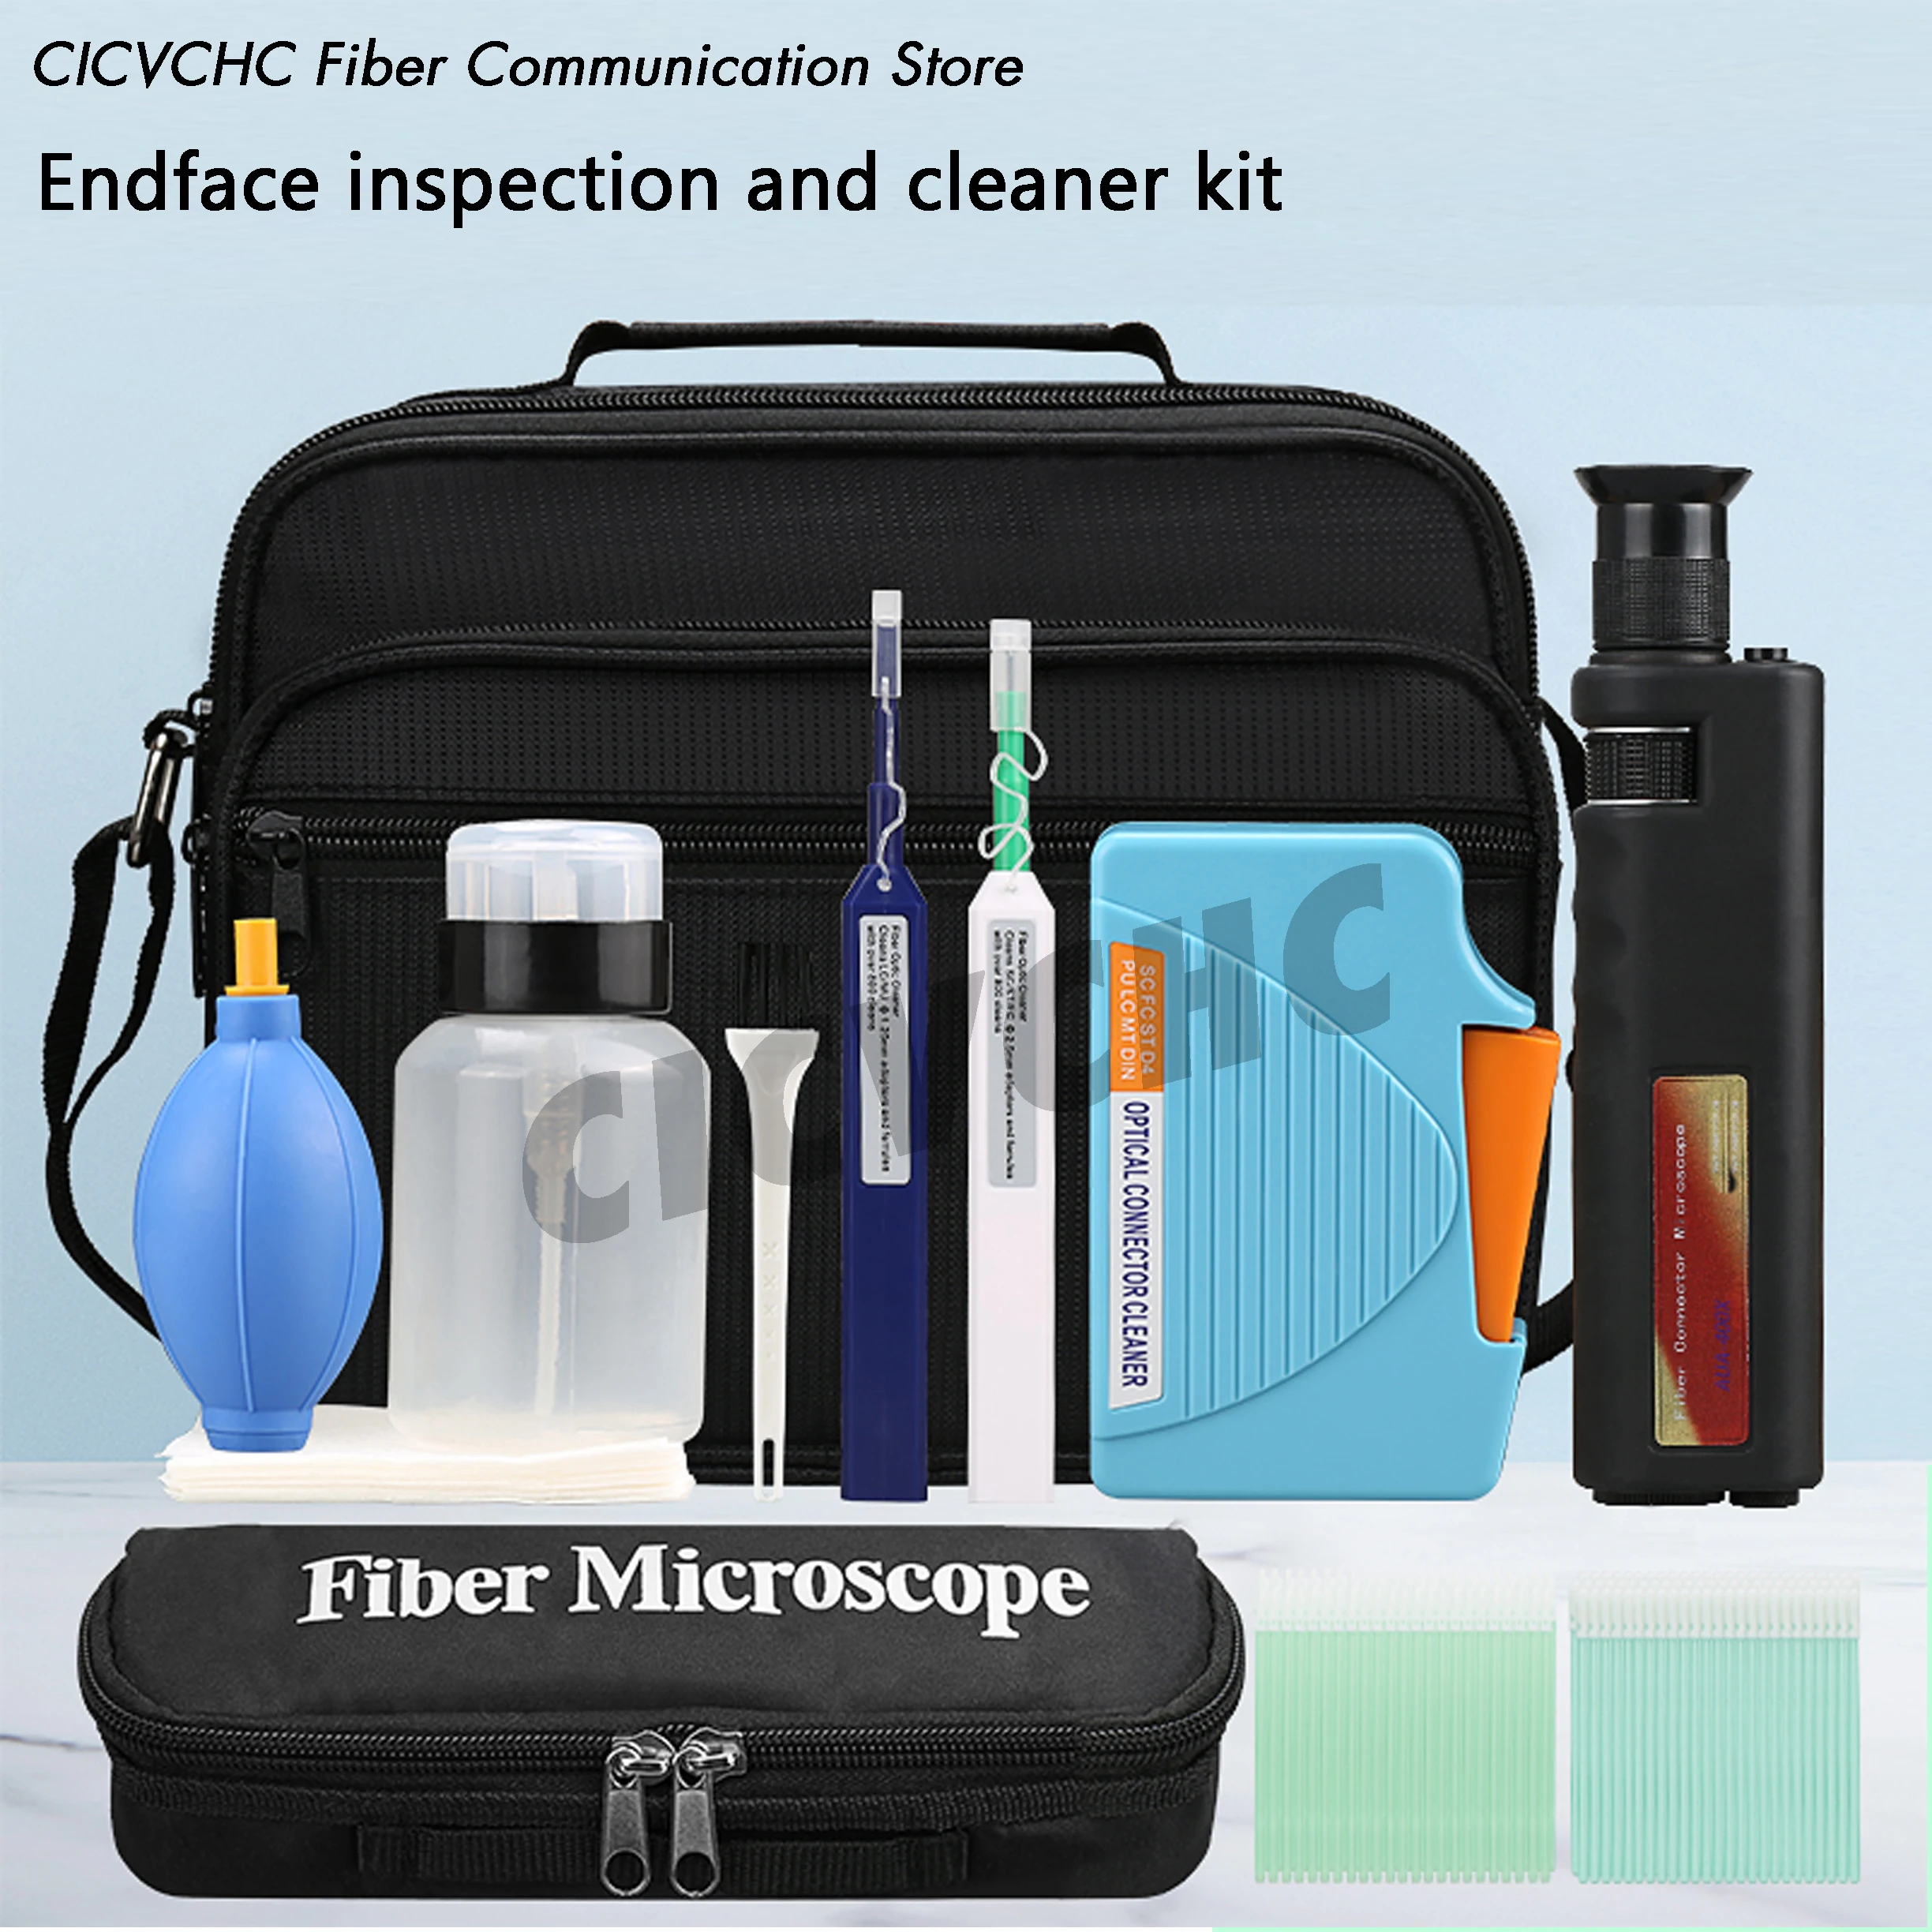 Fiber end-face inspection and cleaner tool kit with 400x fiber microscope (Hand held) 4 3 screen 5 5mm 2mp 1080p handheld endoscope camera cmos borescope inspection otoscope for repairing tool digital microscope